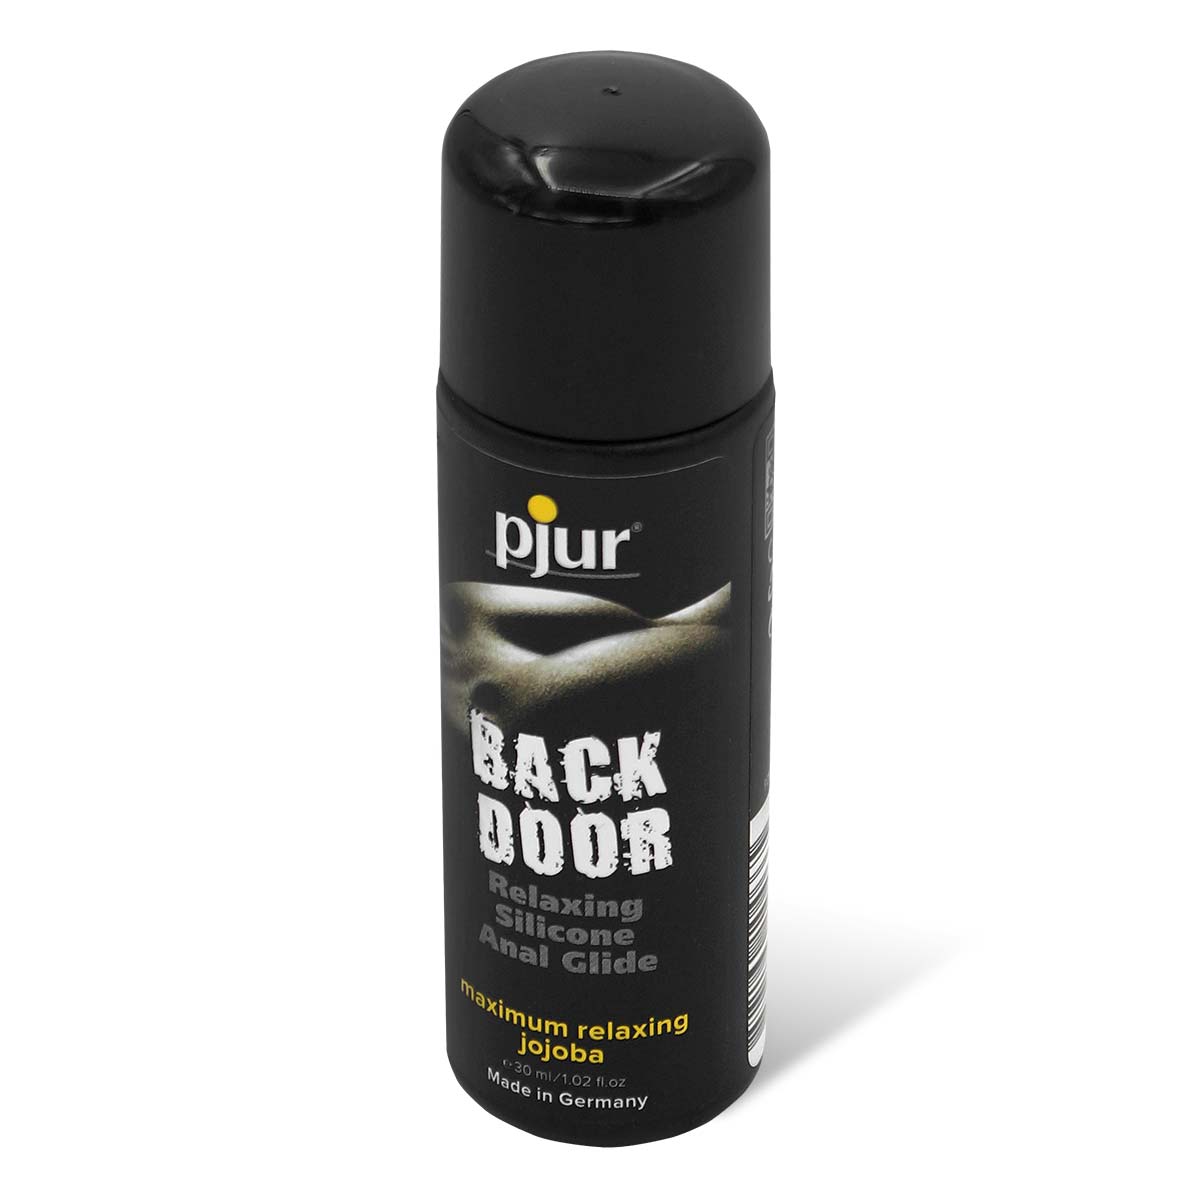 pjur BACK DOOR RELAXING Silicone Anal Glide 30ml Silicone-based Lubricant-p_1